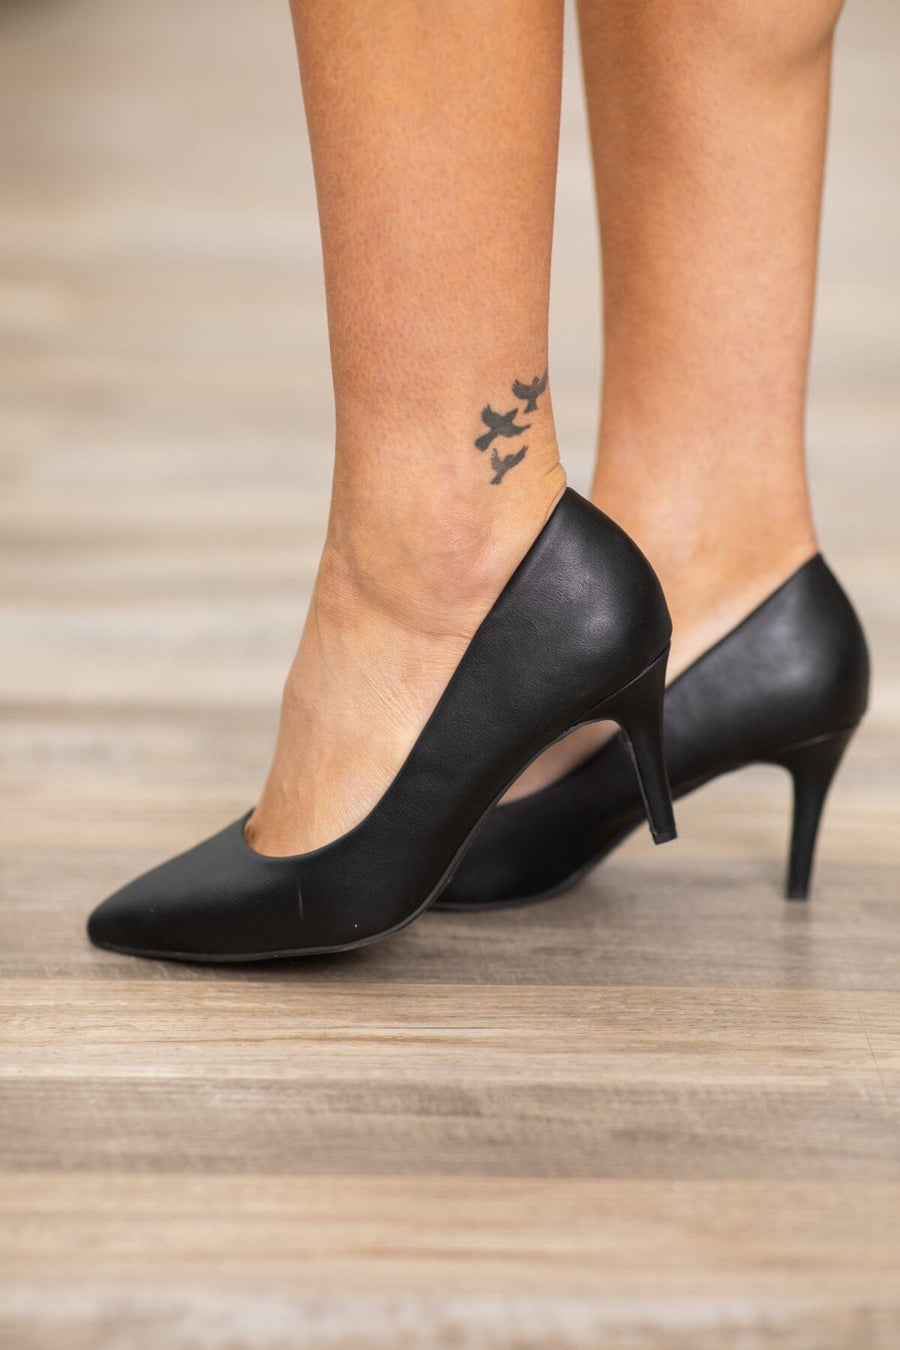 Black Point Toe Closed Toe Heels - Filly Flair